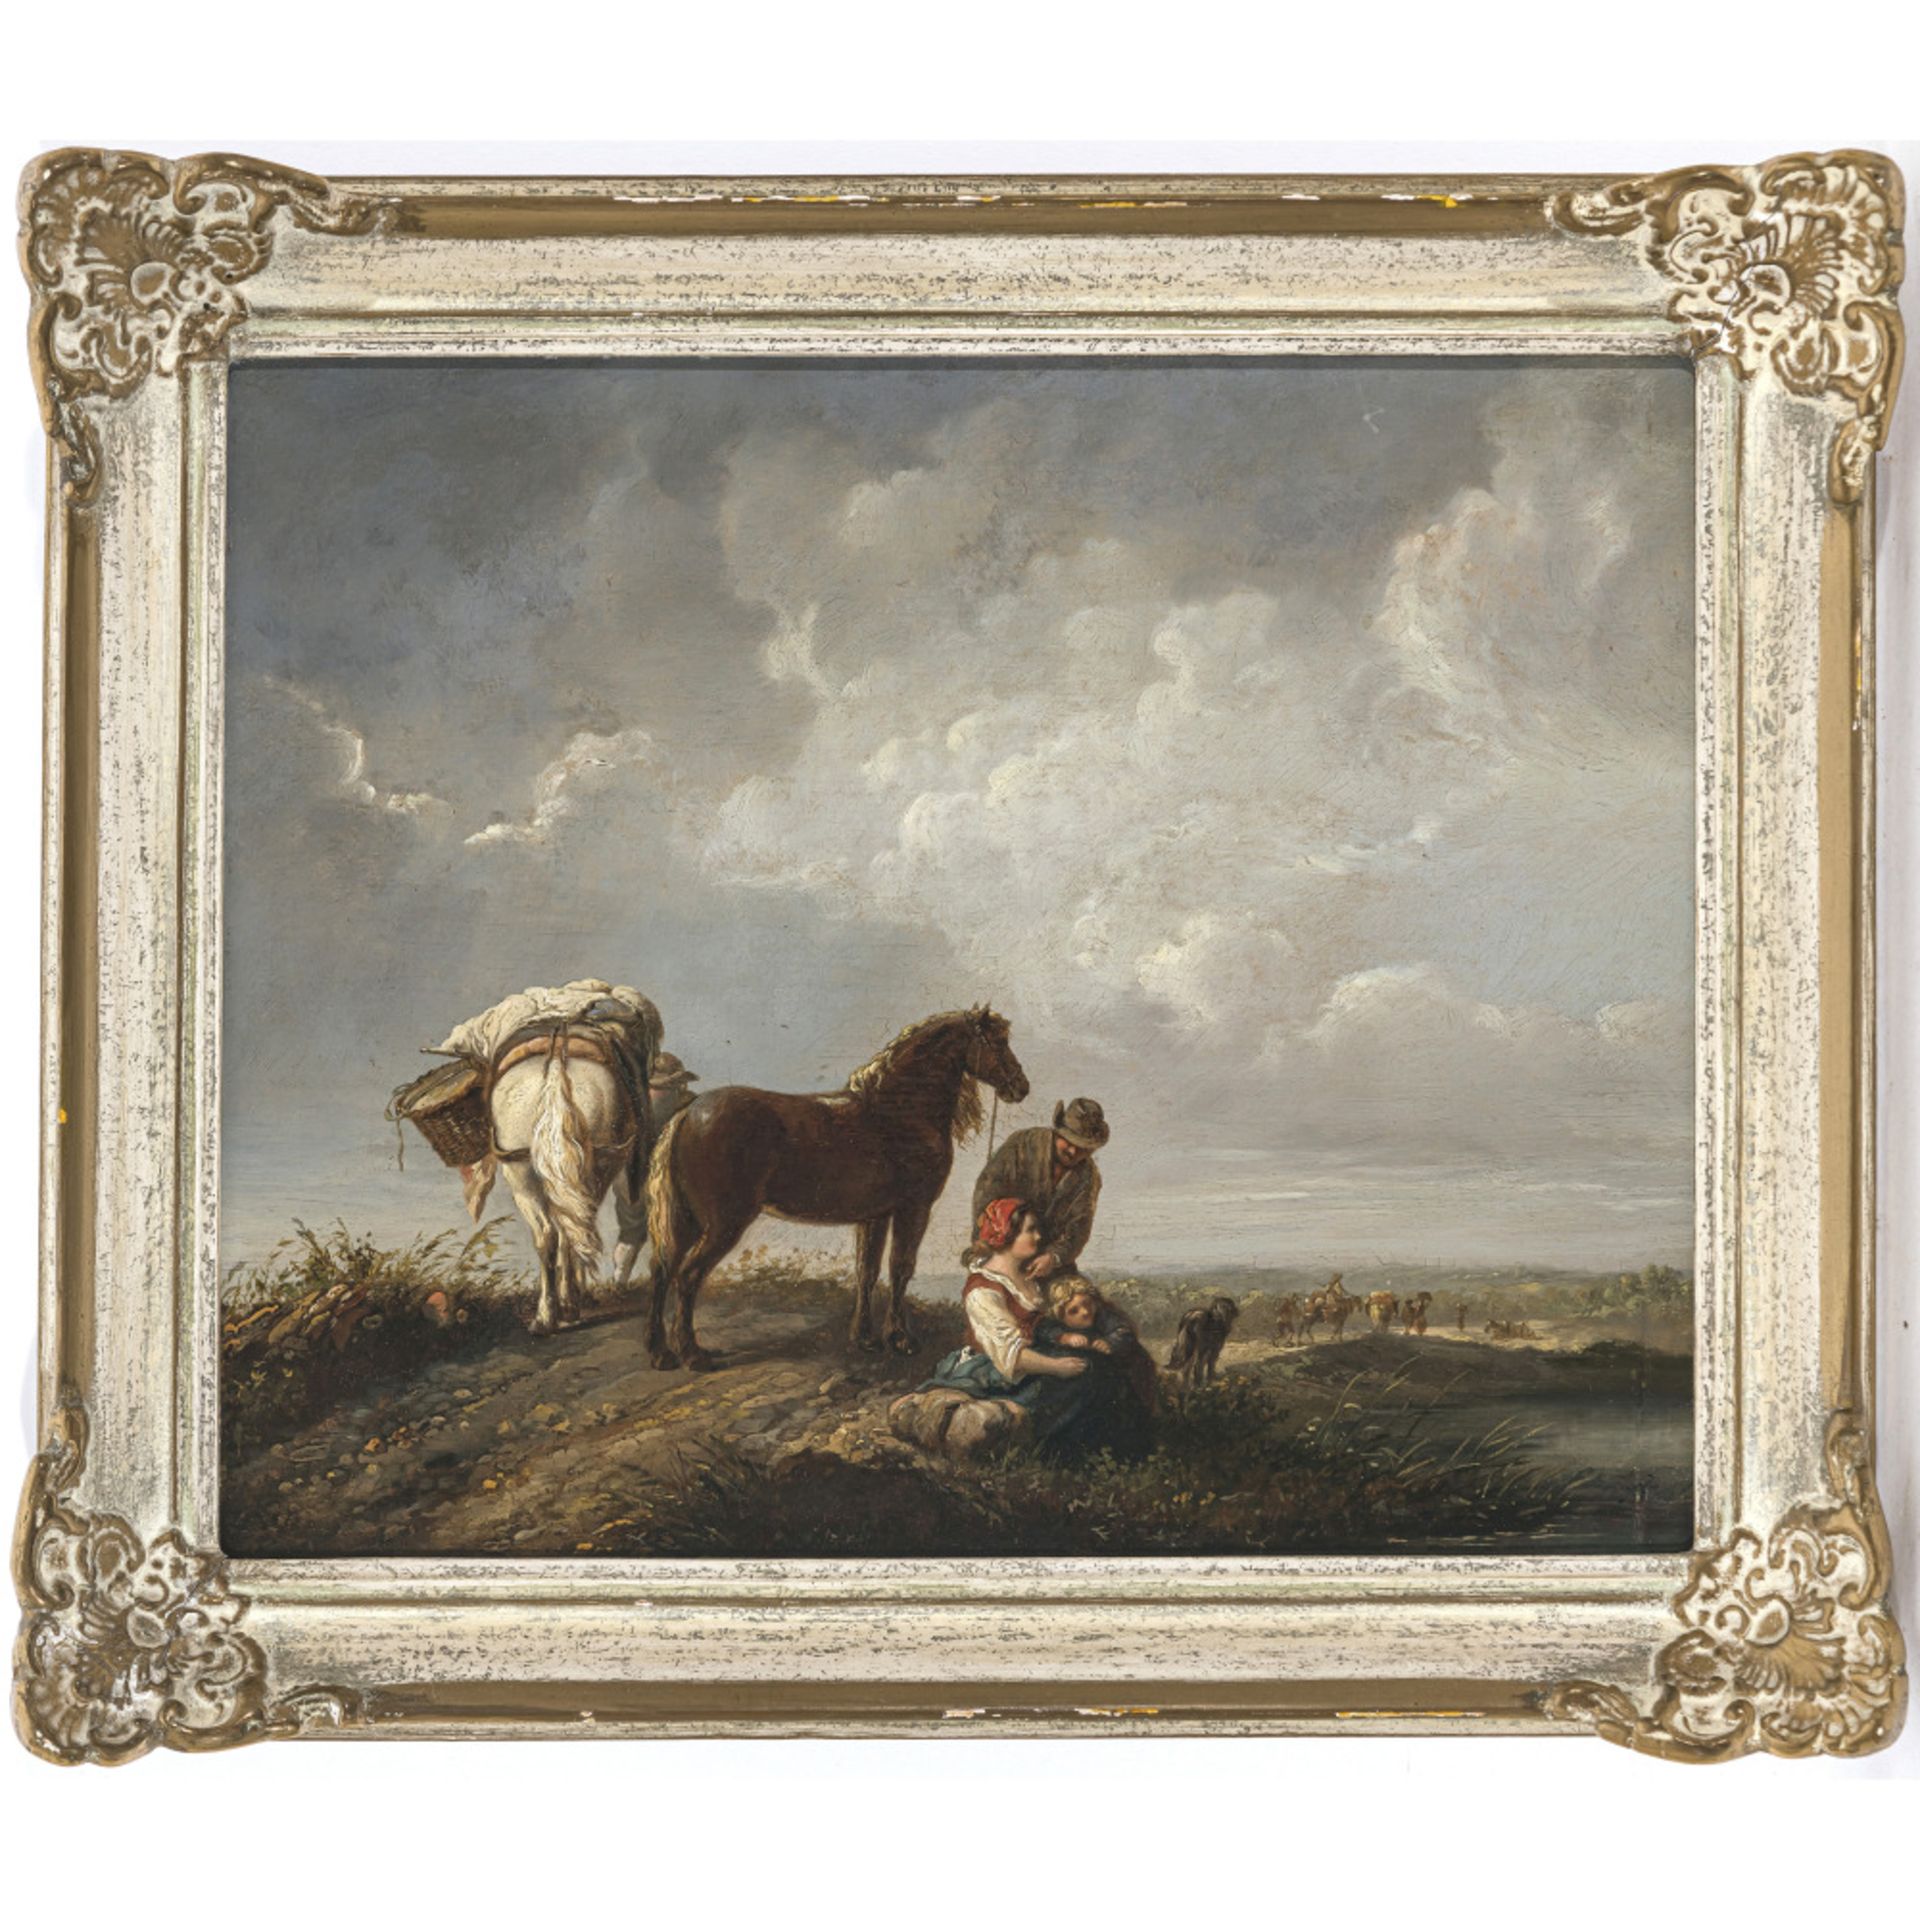 Niederlande 17th/18th century - Resting peasant family with two horses in extensive landscape - Image 2 of 3